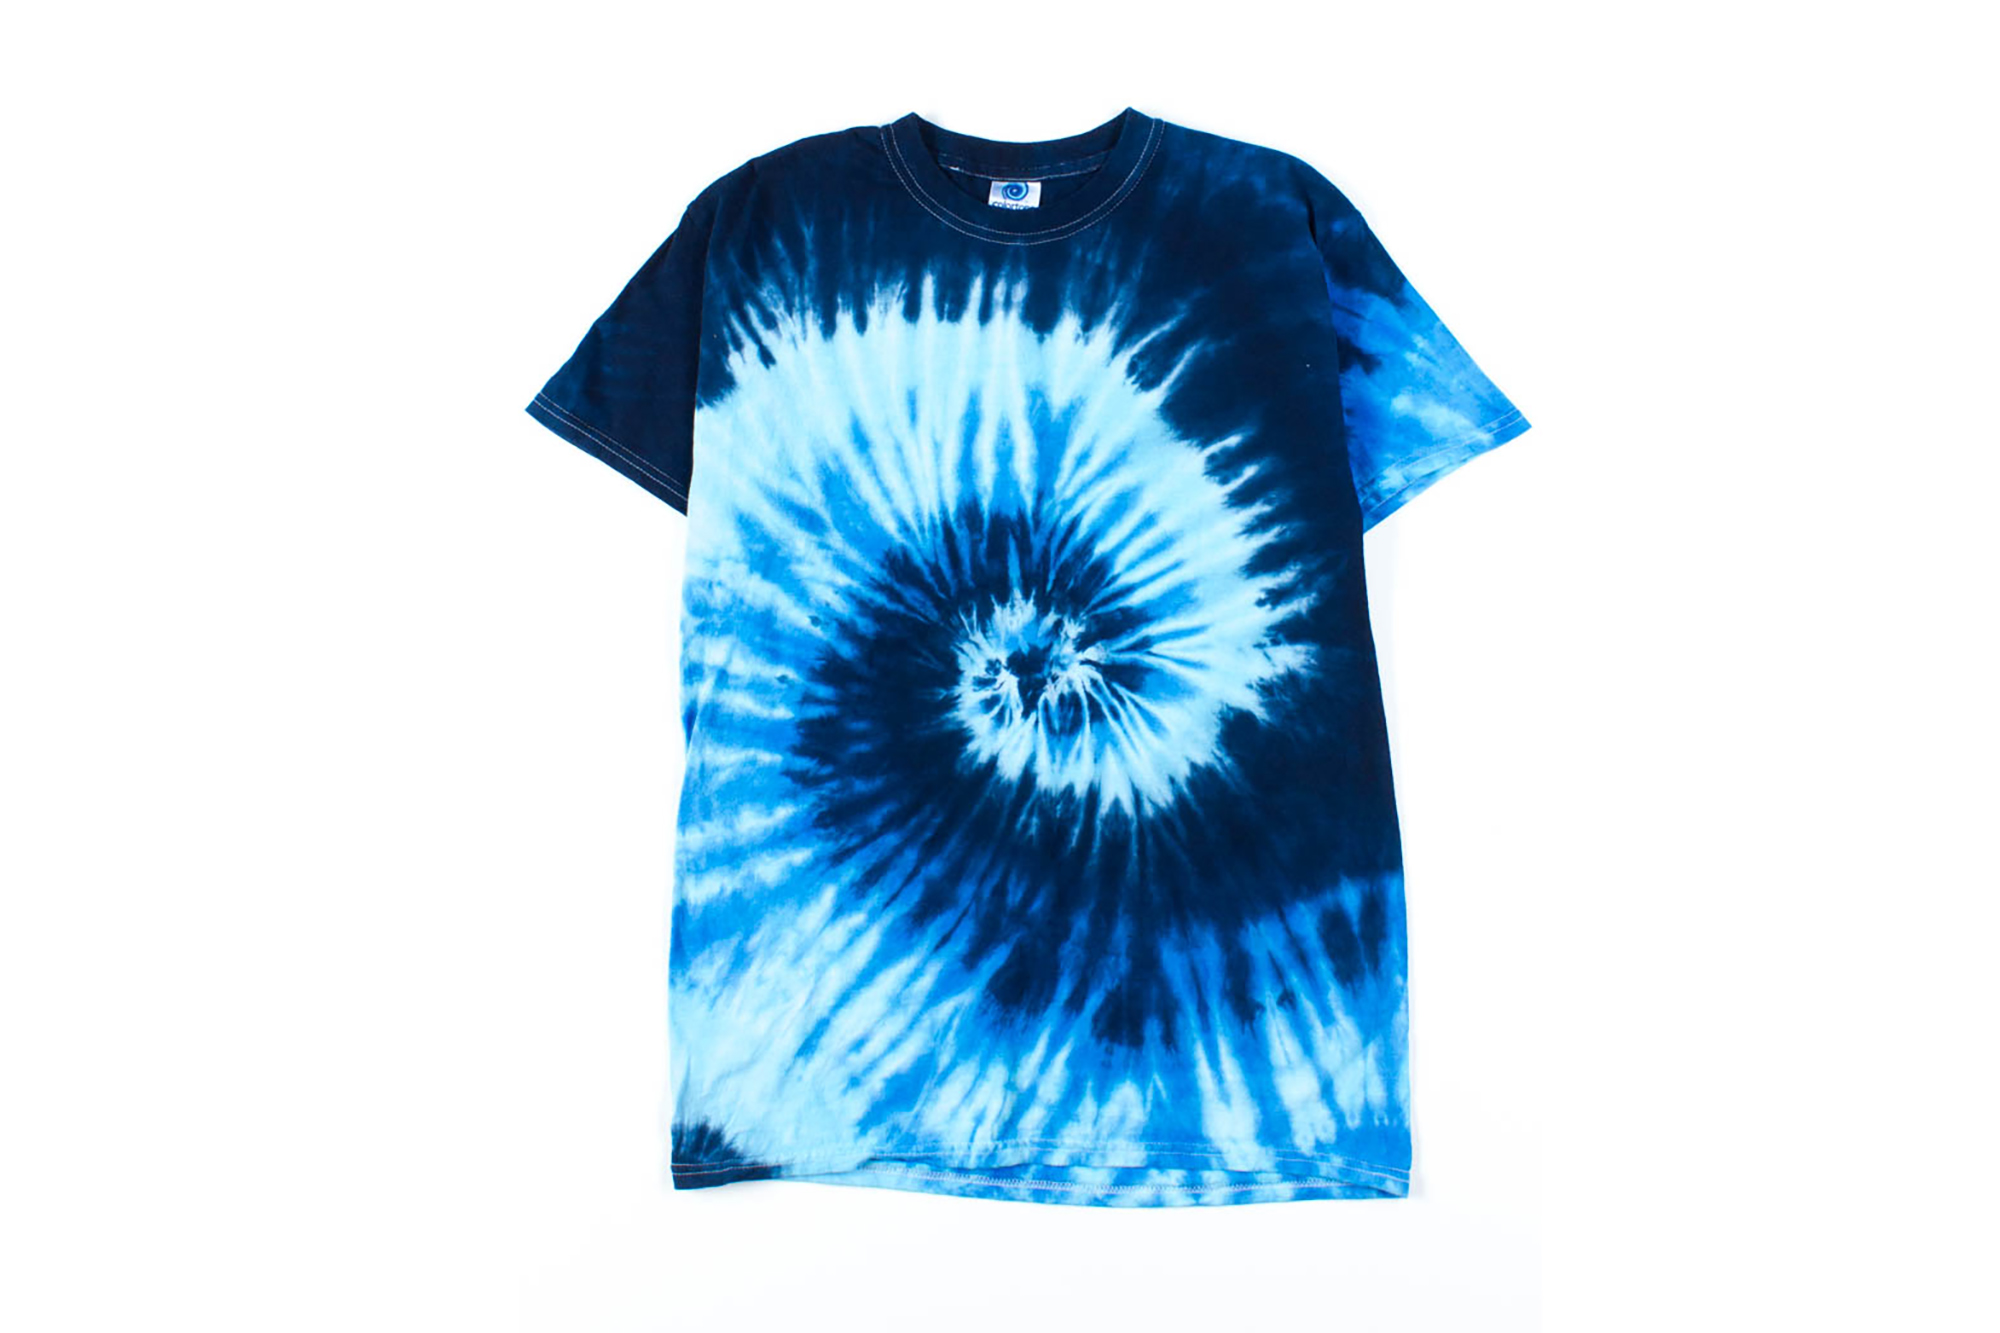 How to Easily Tie-Dye an Old White Shirt At Home - The Manual